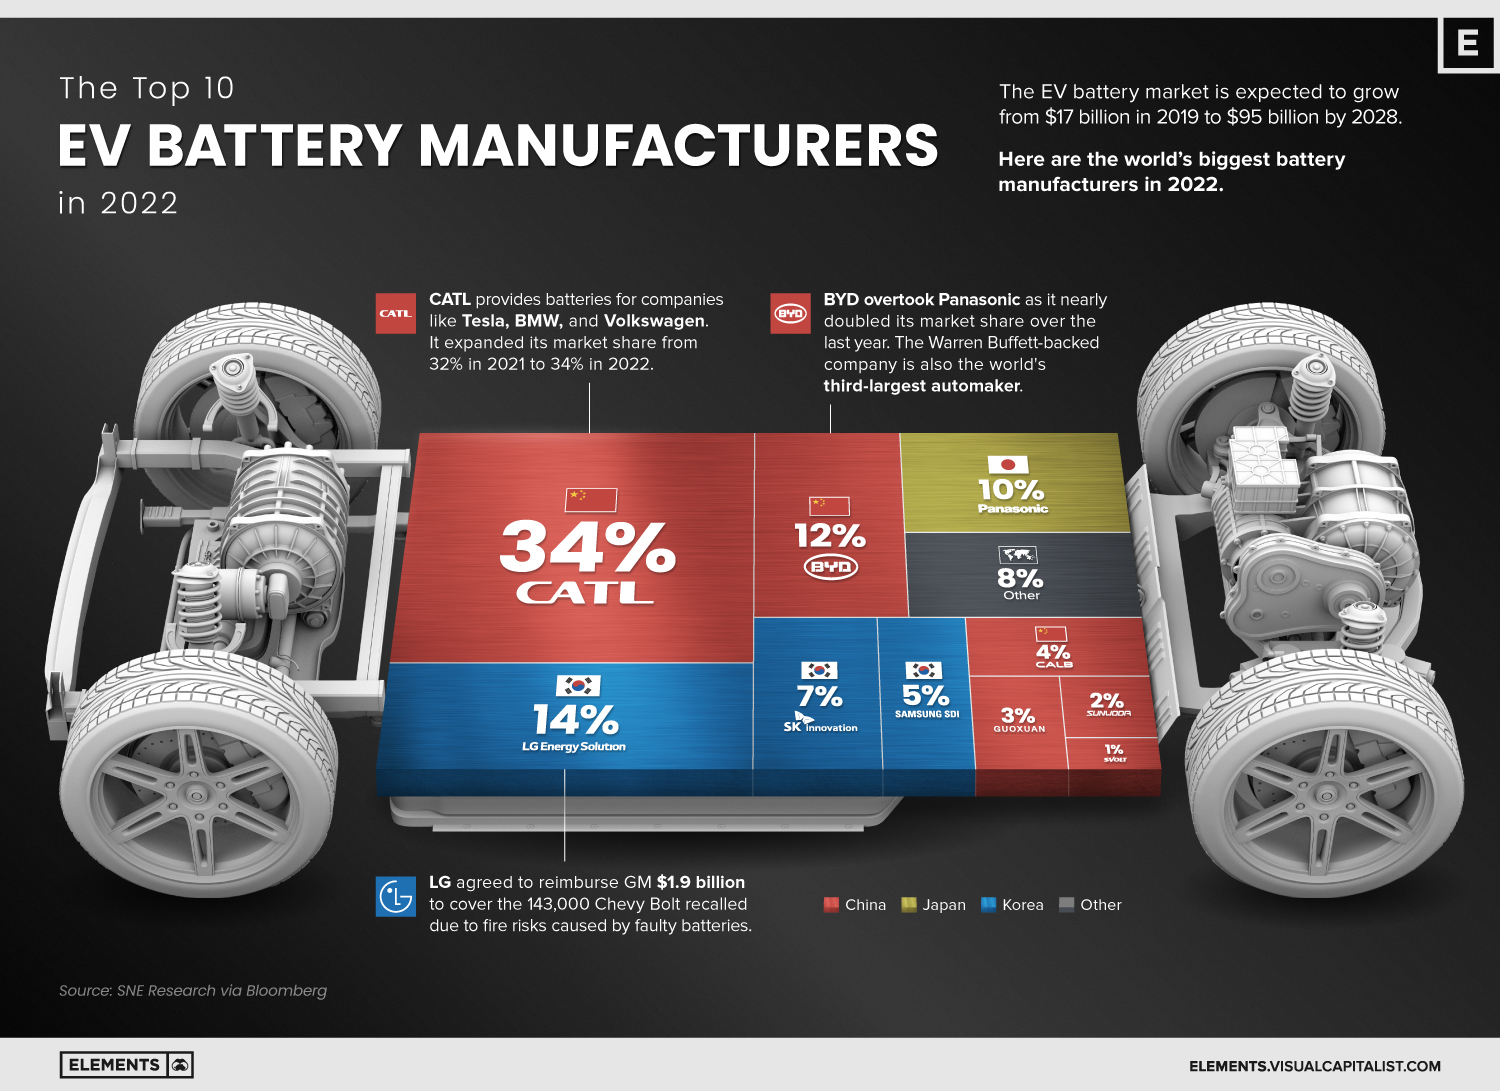 The Top 10 EV Battery Manufacturers in 2022